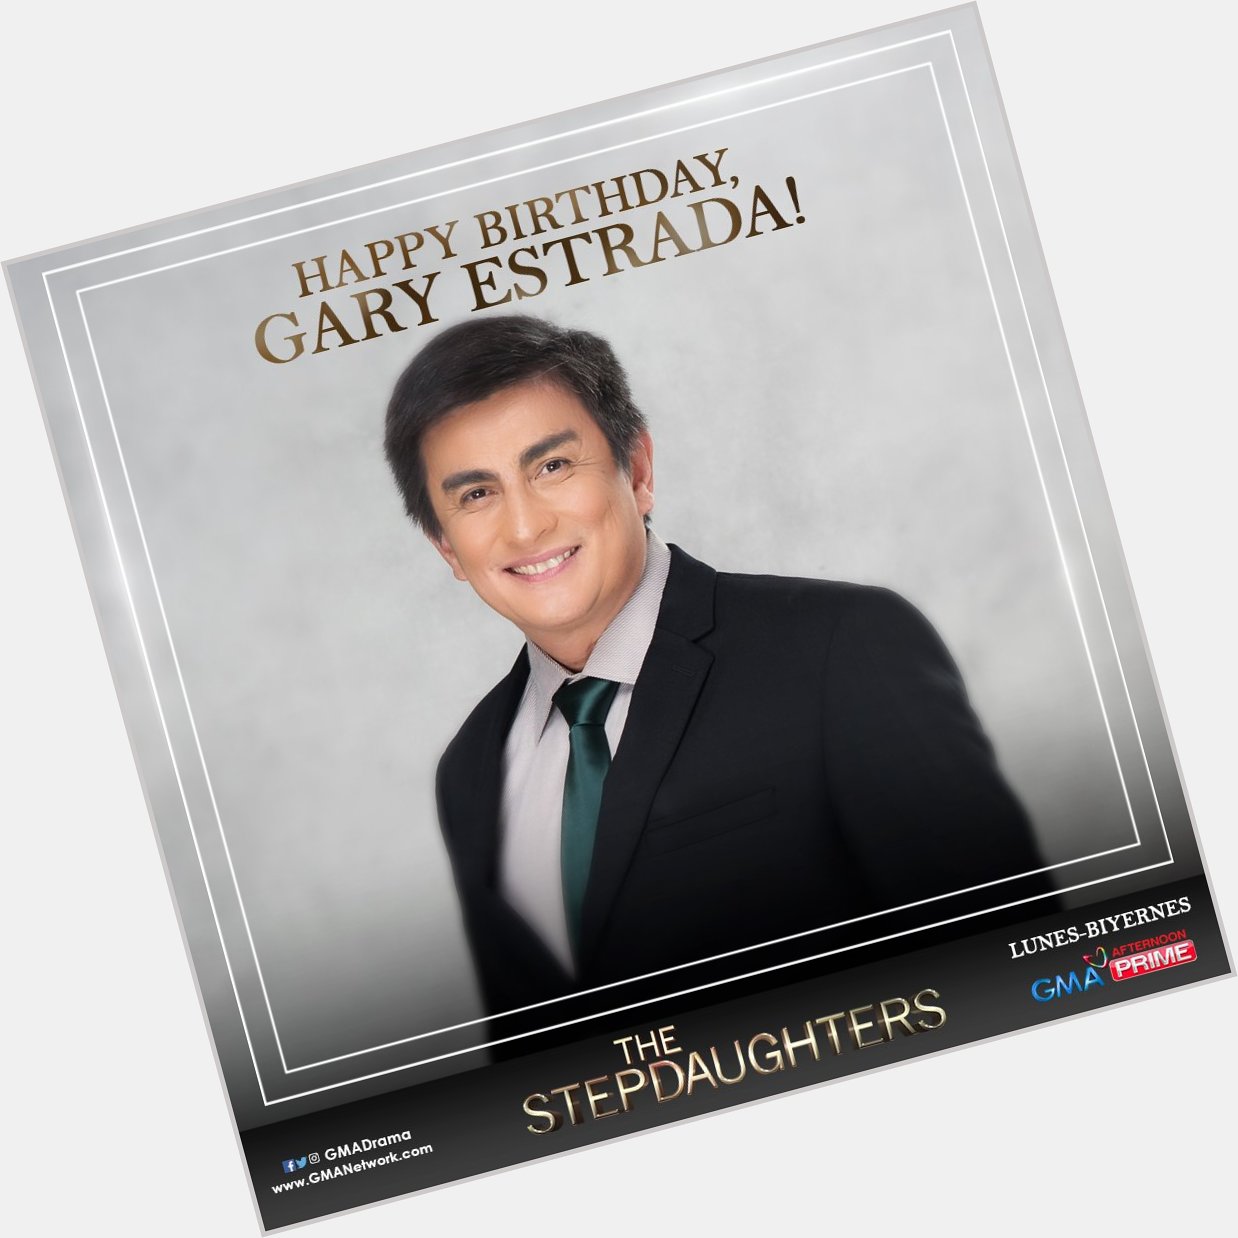 Happy birthday, Gary Estrada! Your family wishes you a day filled with love and happiness. 